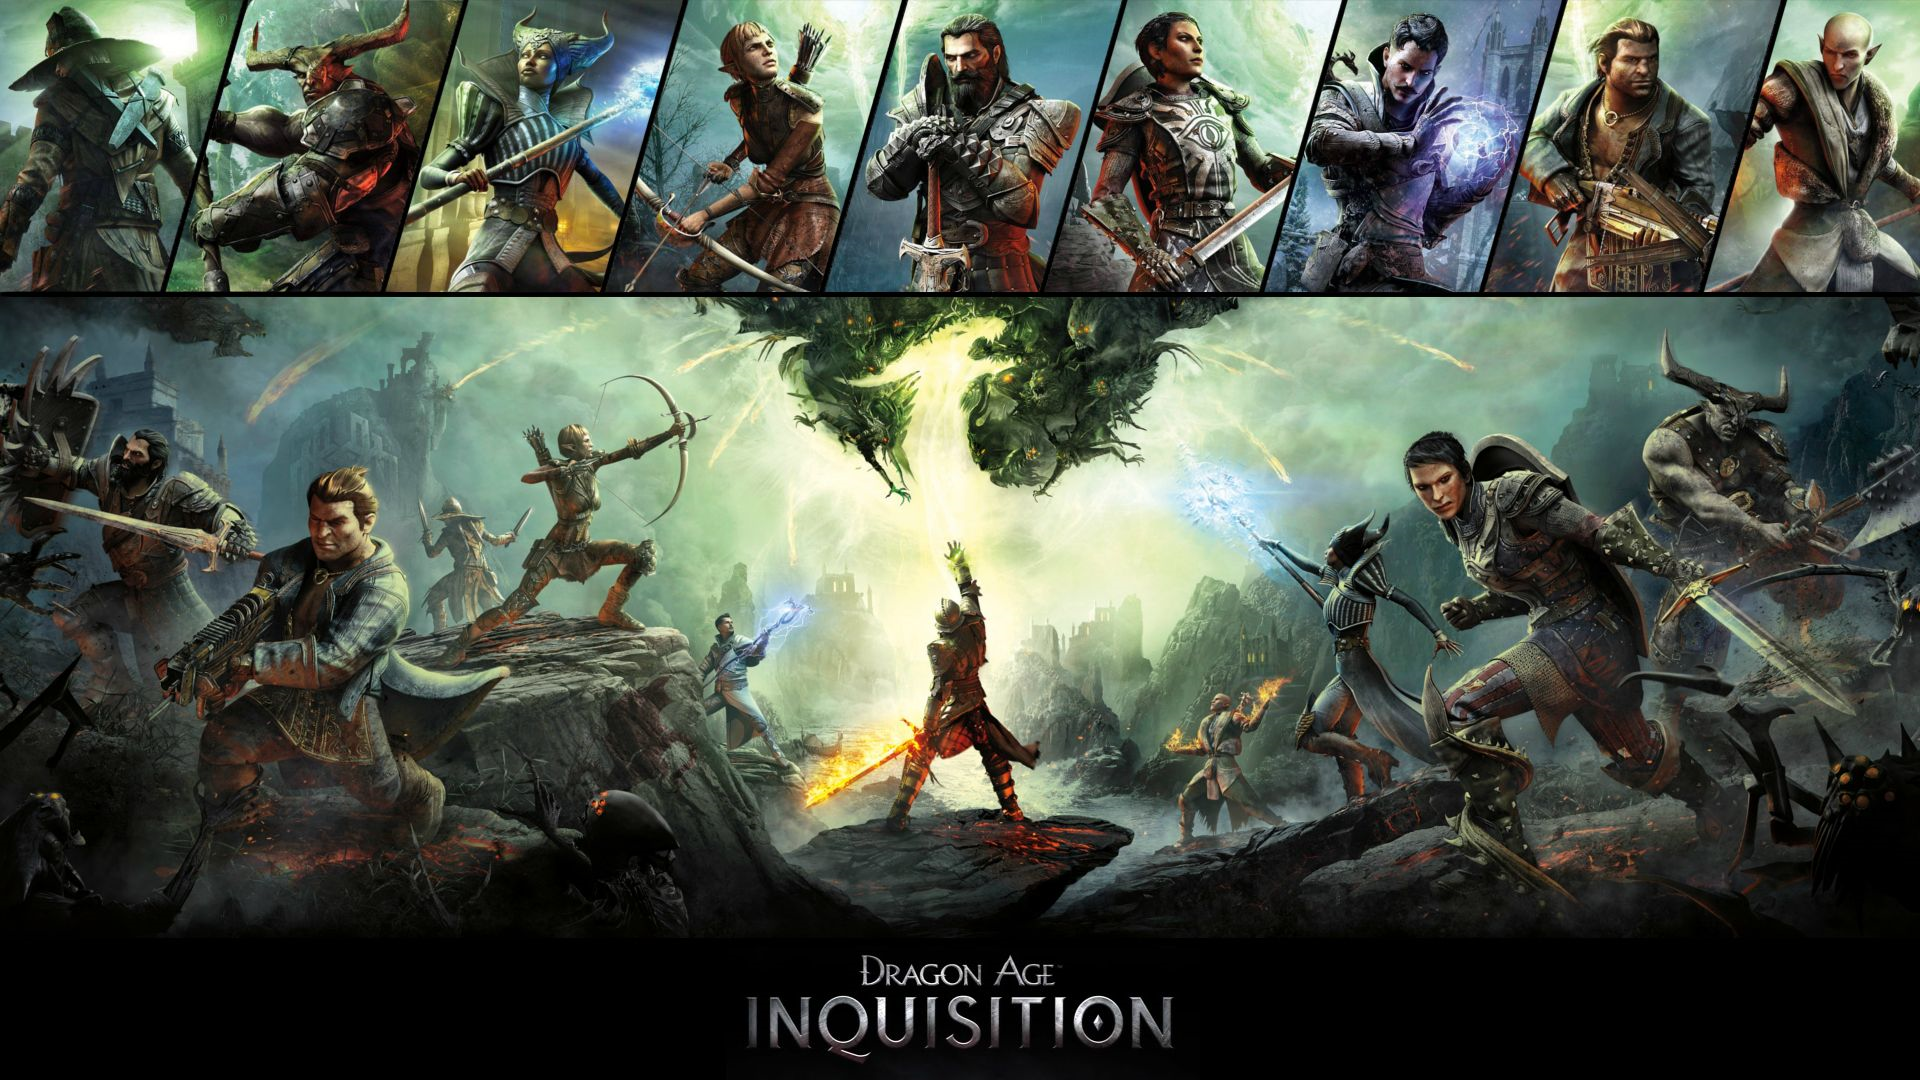 General 1920x1080 video games fantasy art collage RPG Dragon Age: Inquisition PC gaming Bioware Electronic Arts